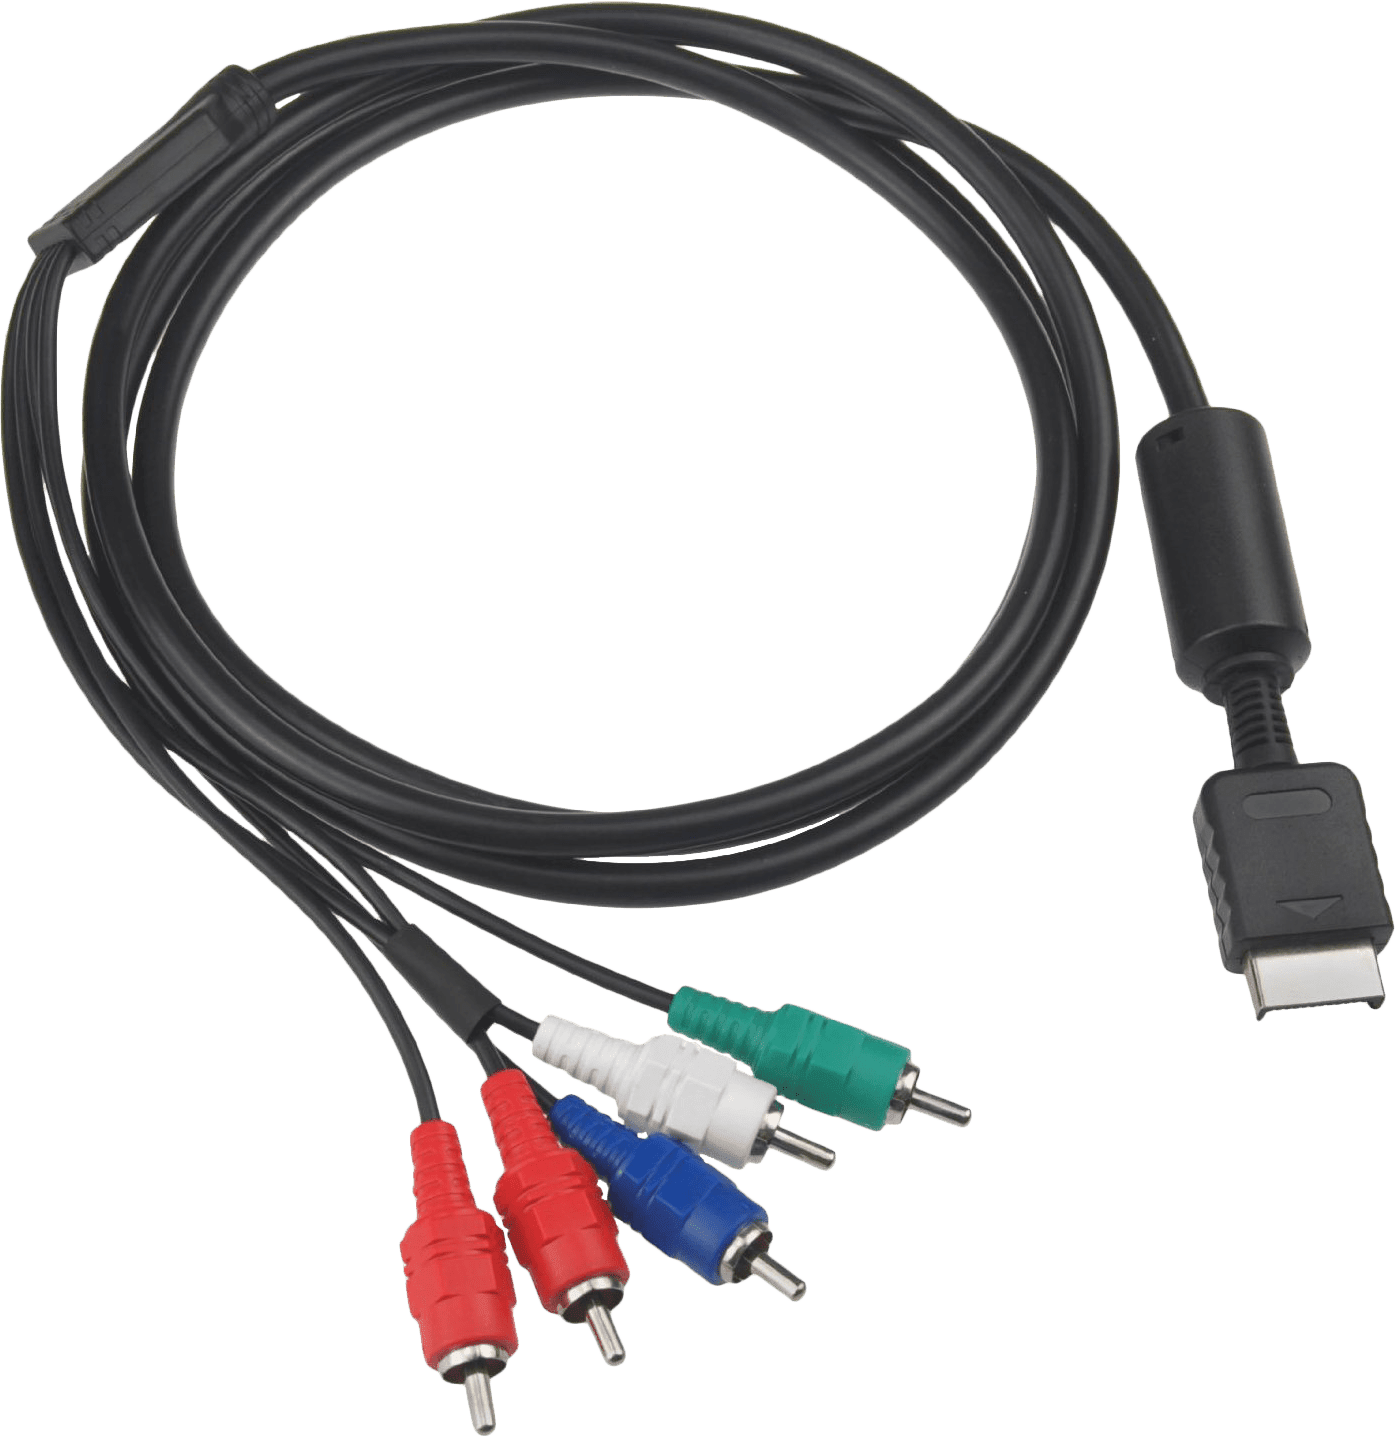 PlayStation AV to Component Cable - Generic (PS2 / PS3)